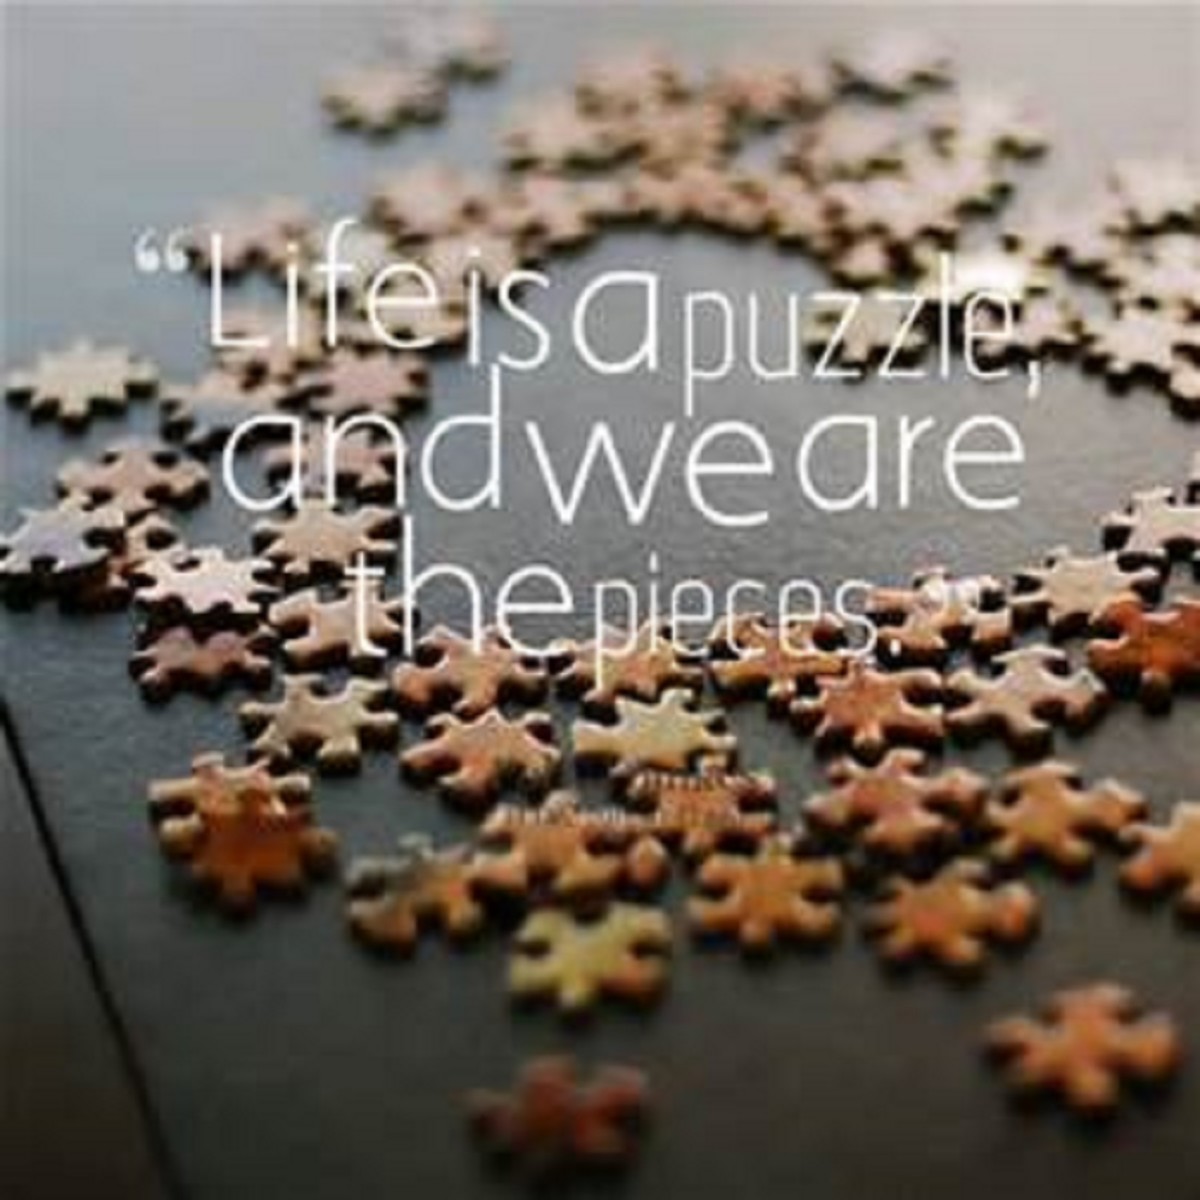 httppammorrishubpagescomhublife-is-like-a-jigsaw-puzzle